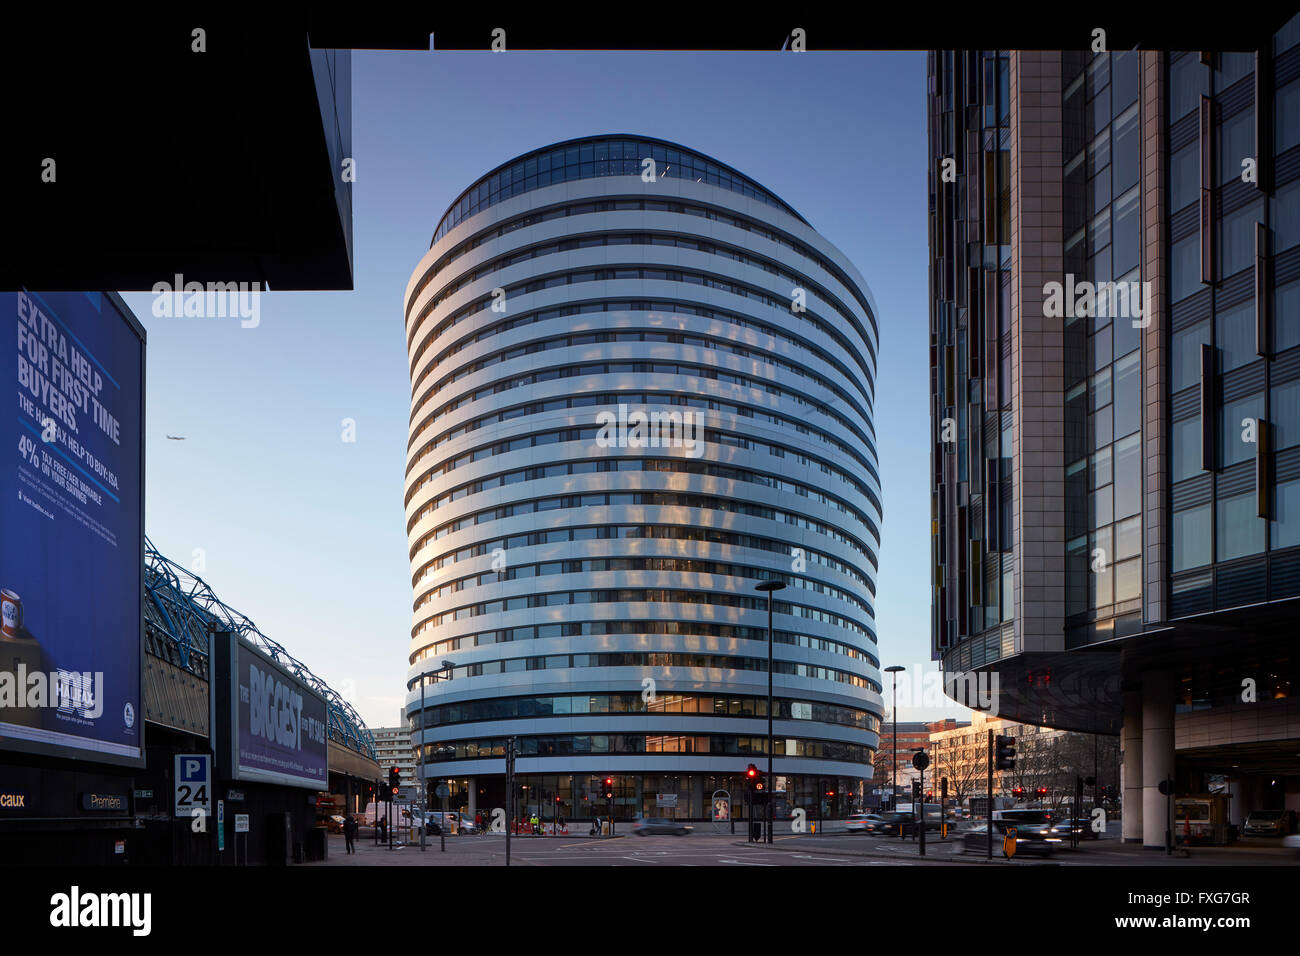 Square view at dawn from street. Westminster Bridge Road, London, United Kingdom. Architect: AHMM , 2015. Stock Photo